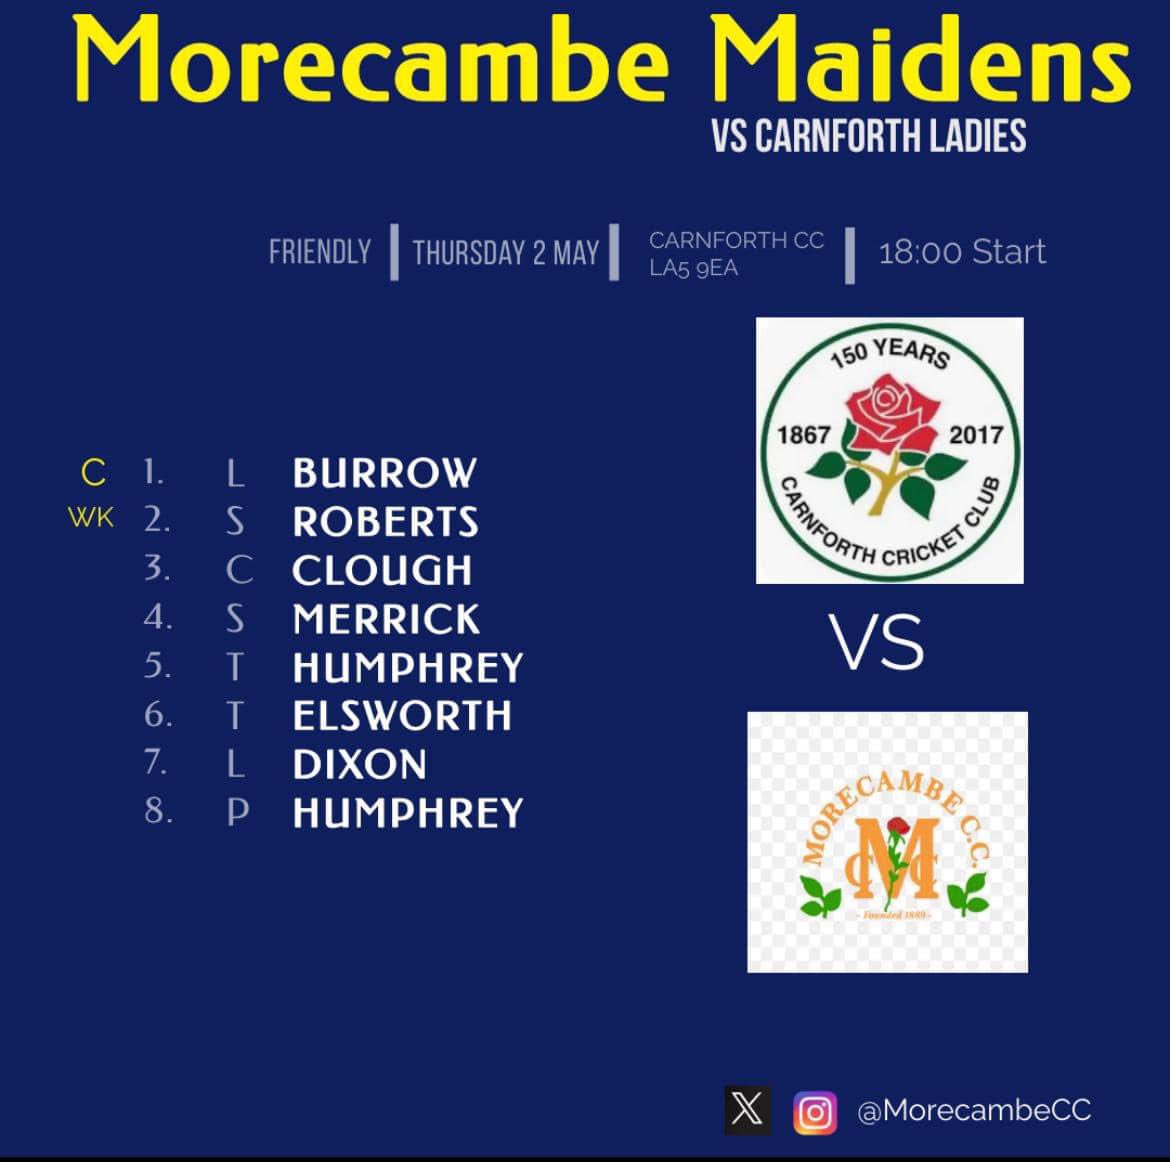 Another week another win for @MorecambeCC Maidens 🏏💪 Morecambe 274 Carnforth 223 Well done team! Thoroughly enjoyable evening, cricket in the sunshine ☀️ bliss 👌🏻🏏